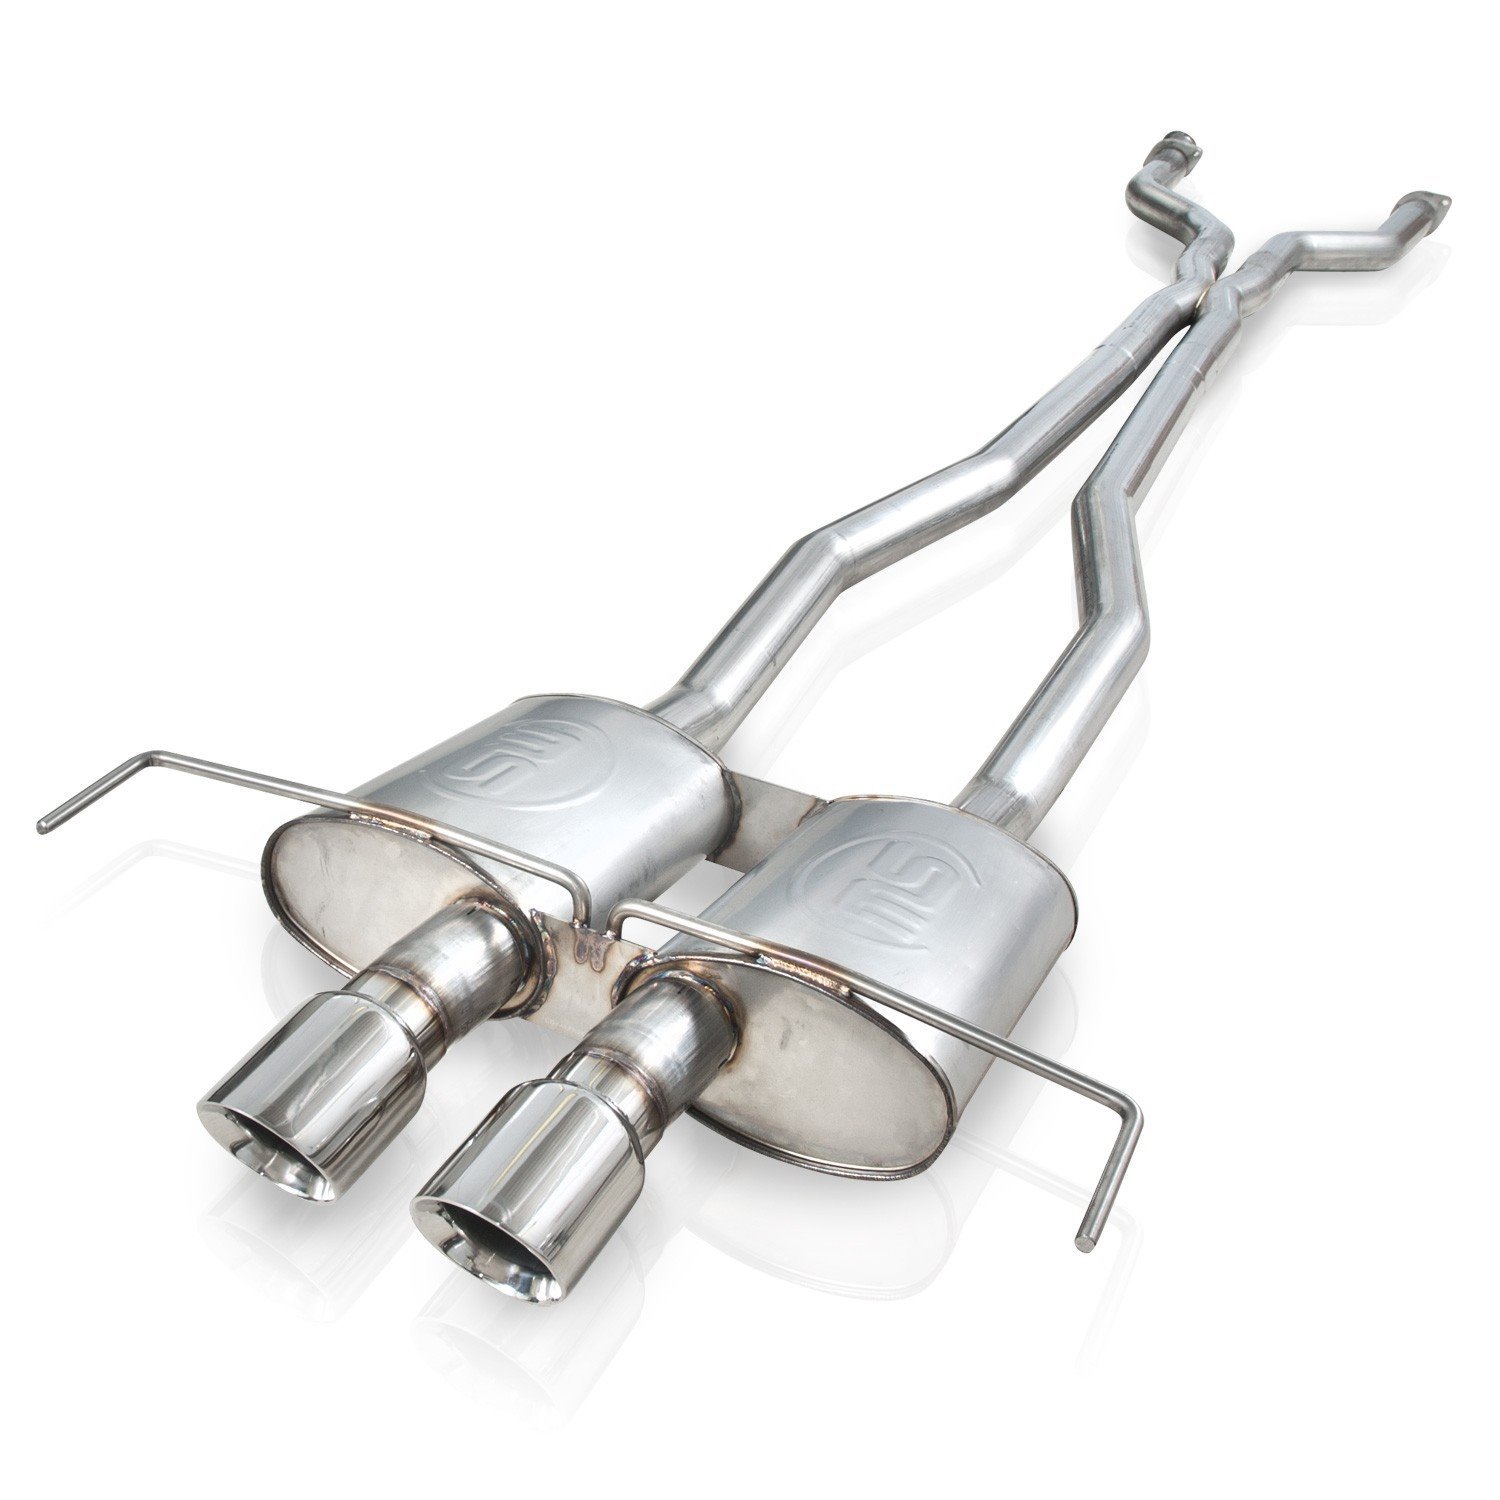 09-15 CTSV EXHAUST SYSTEM